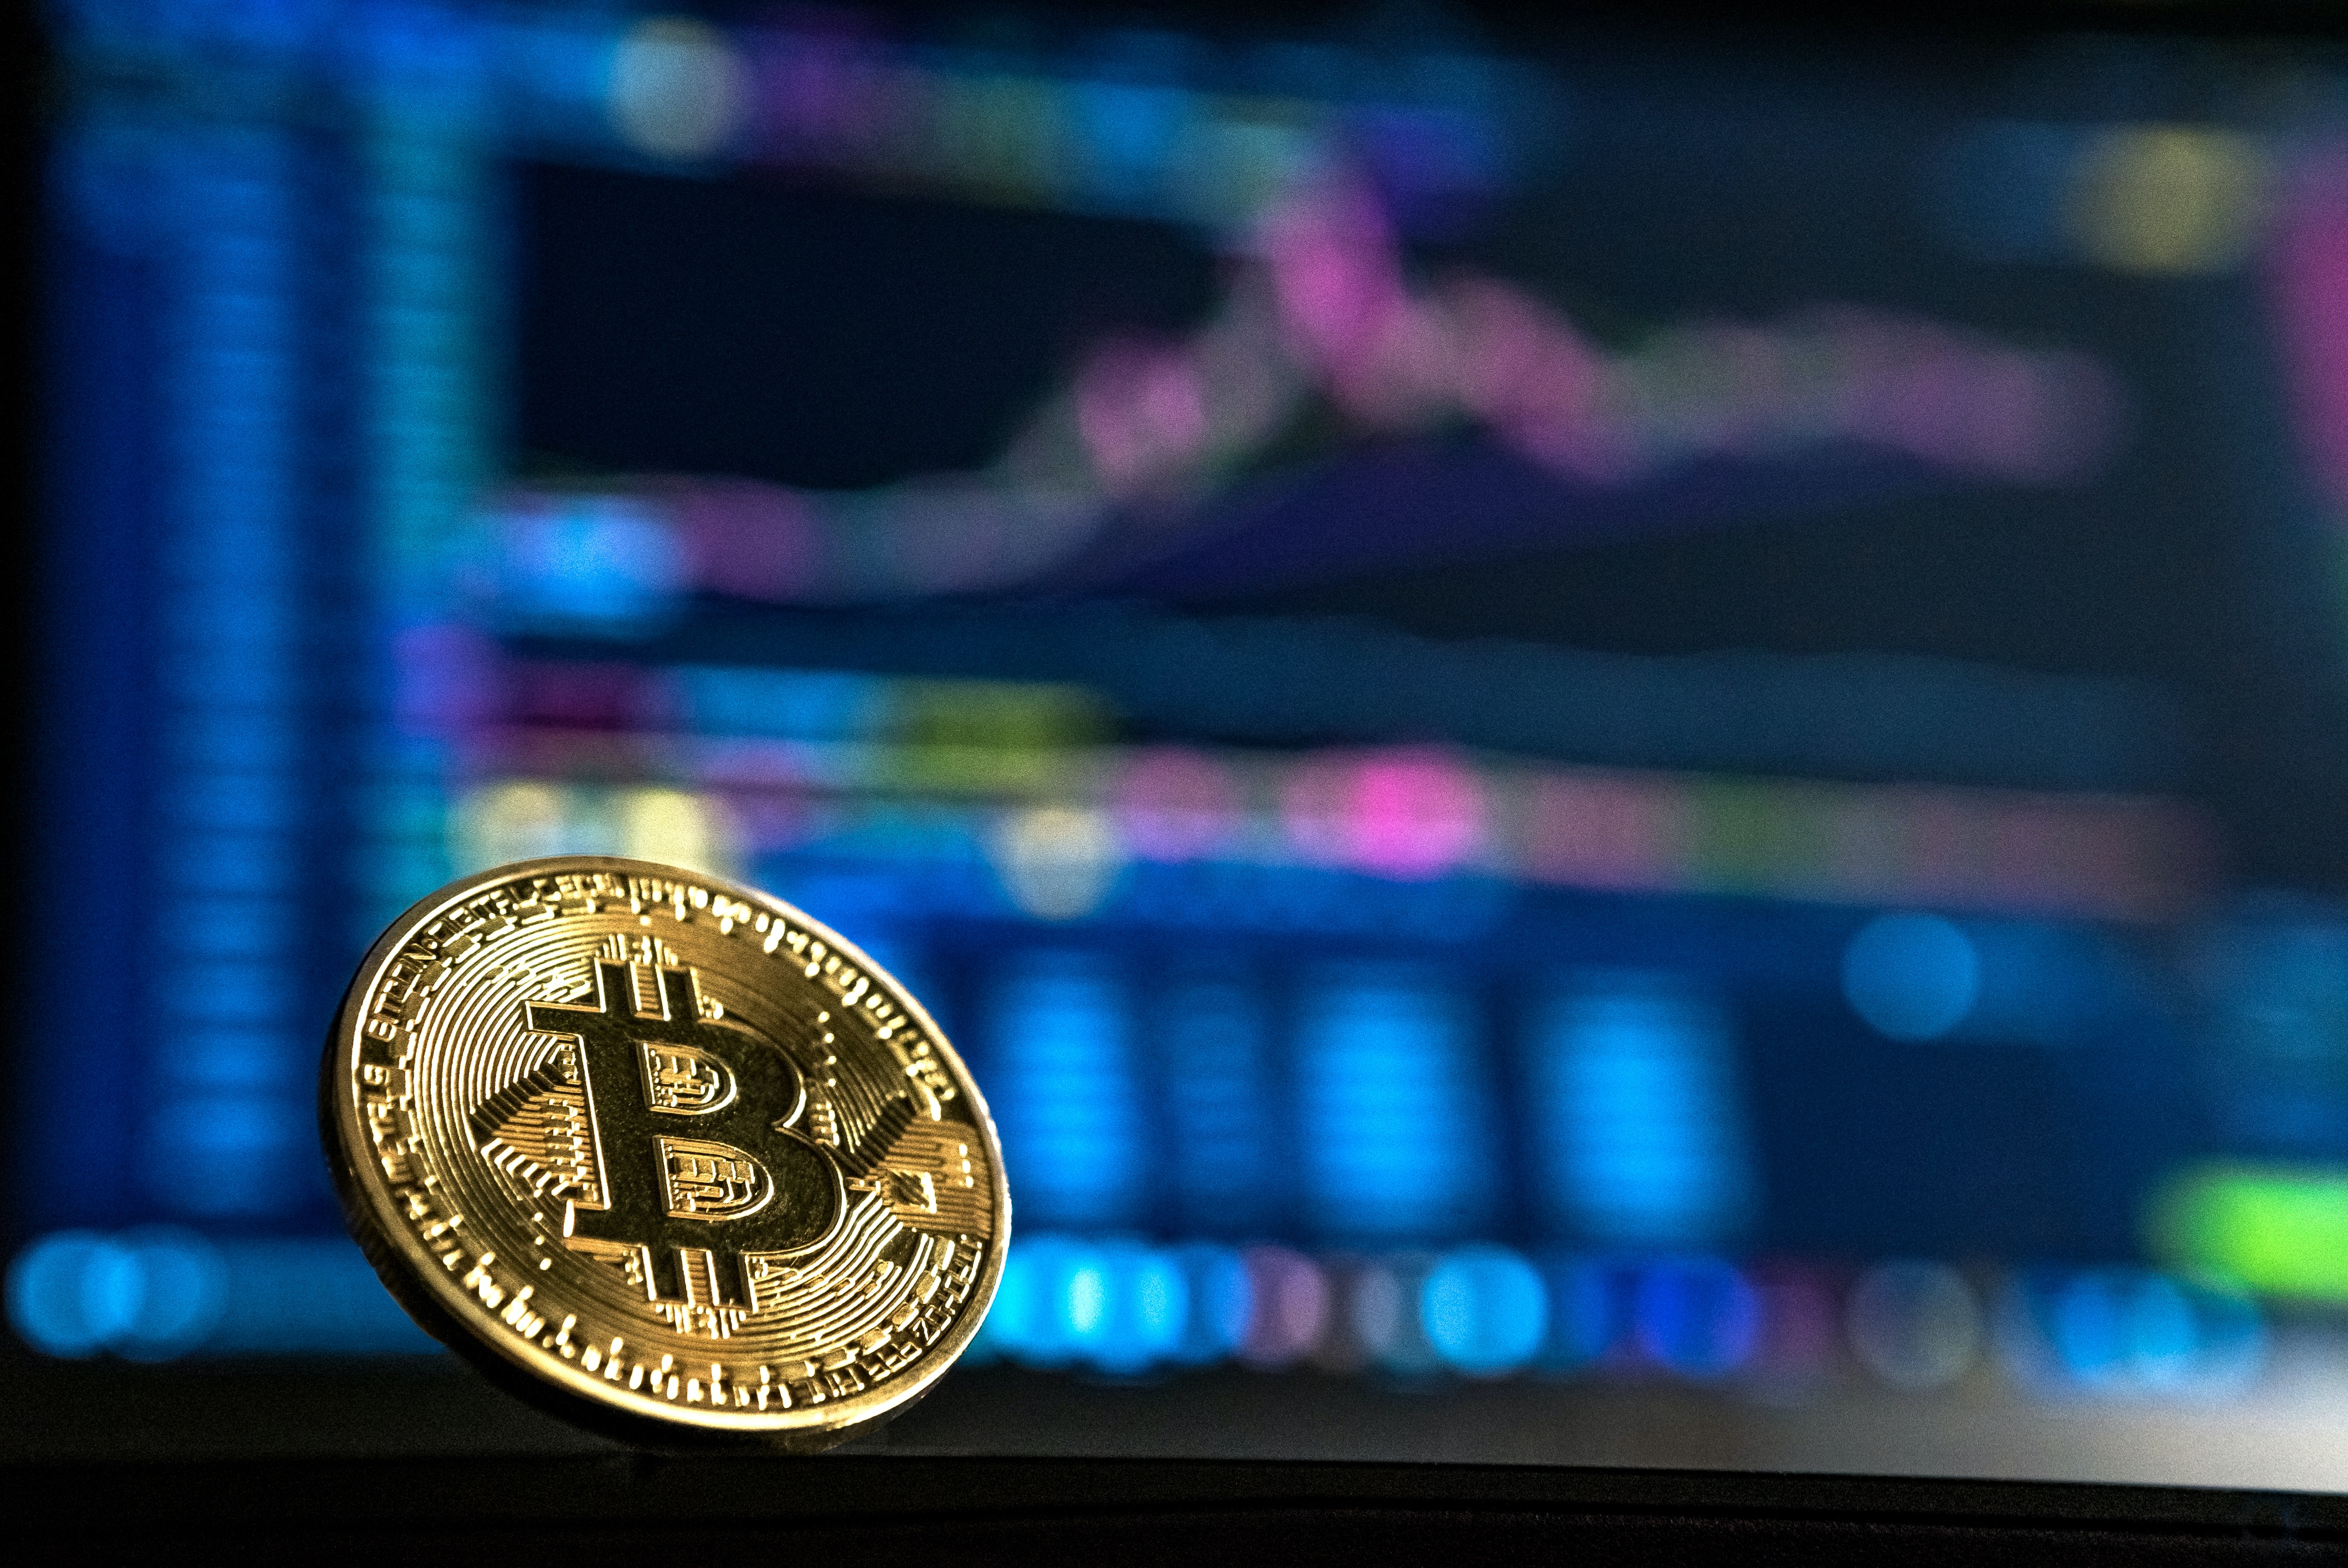 Gold Bitcoin with Neon Dashboard blurred in Background